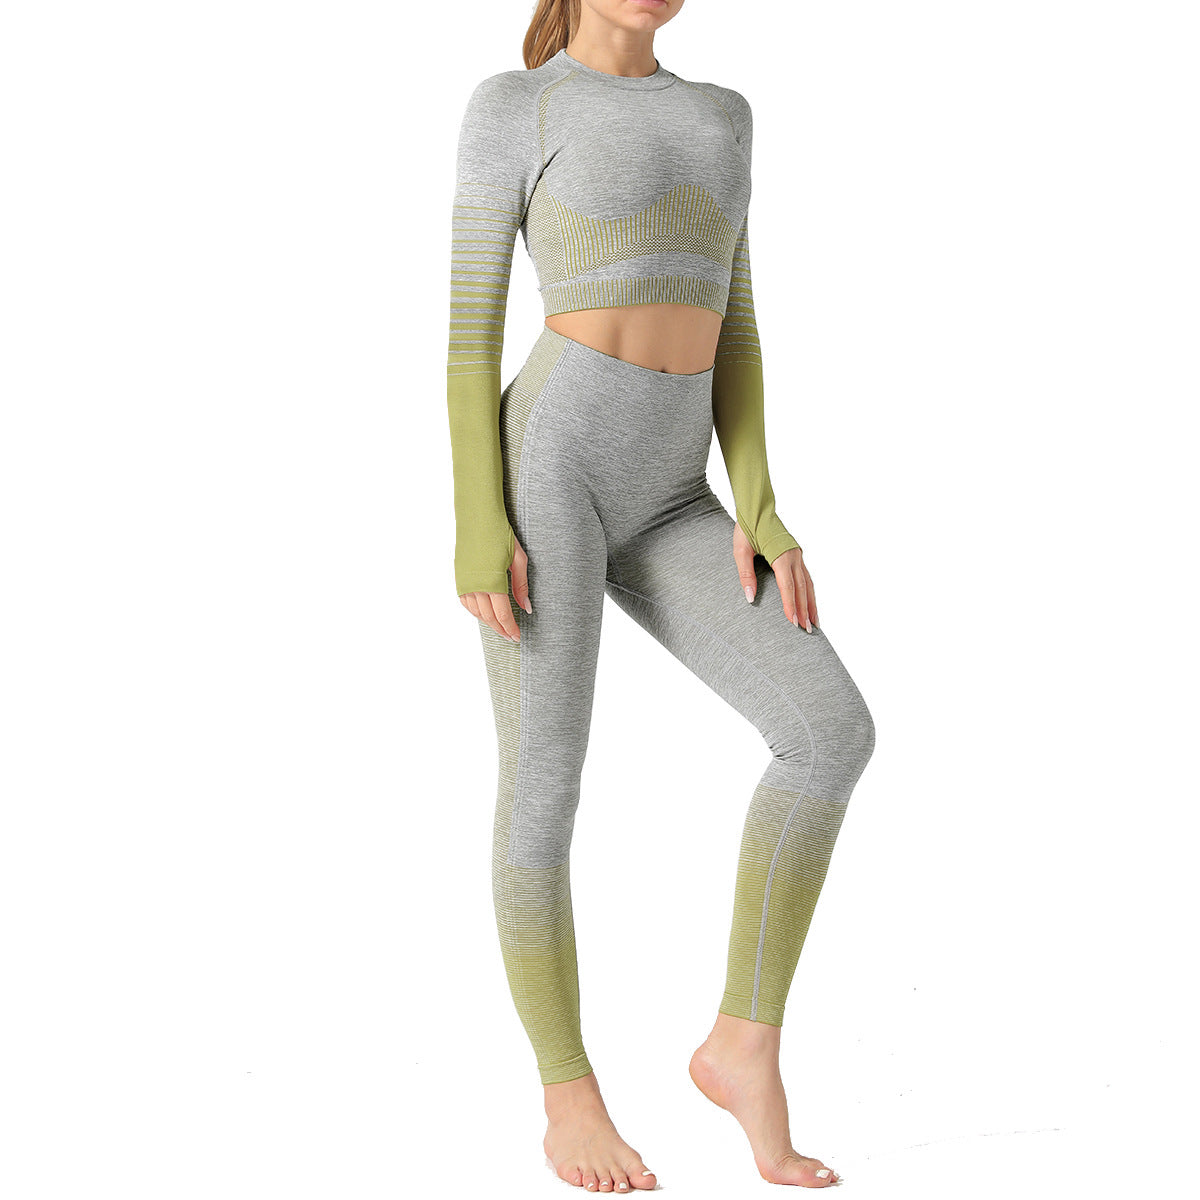 Seamless Yoga Suit with Nylon Blend Fabric